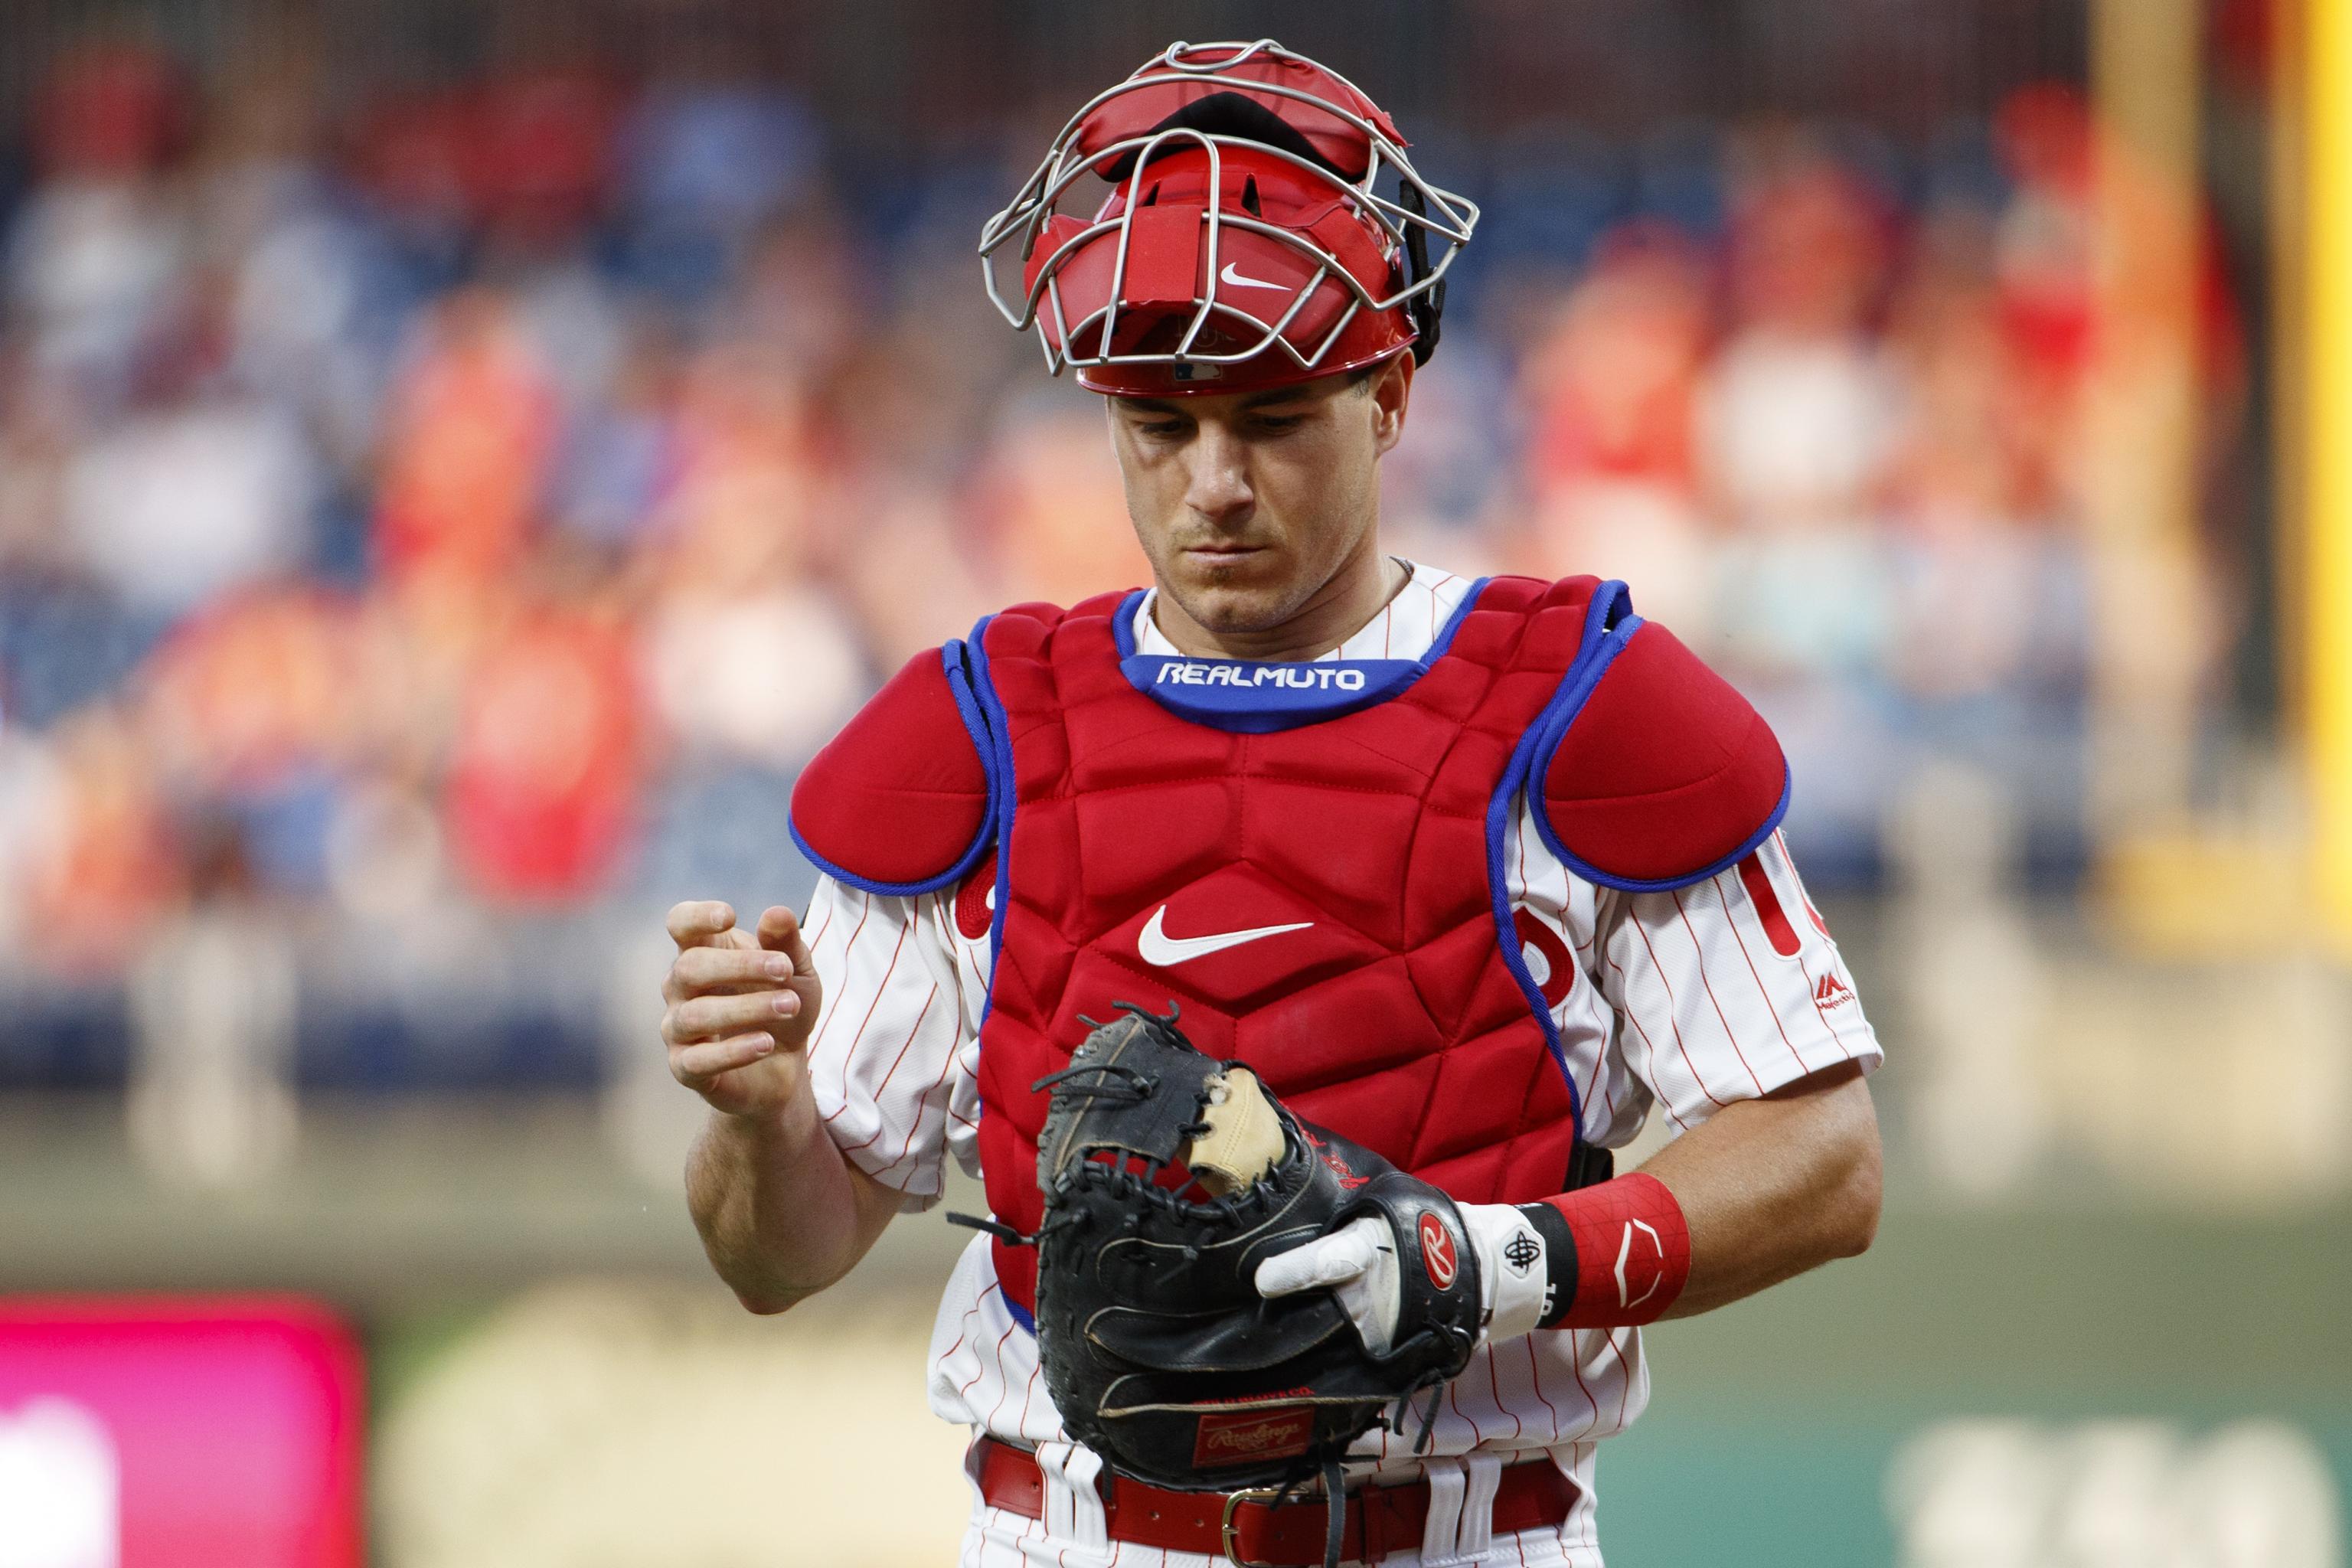 Phillies reportedly pessimistic about chances to retain J.T. Realmuto   Phillies Nation - Your source for Philadelphia Phillies news, opinion,  history, rumors, events, and other fun stuff.